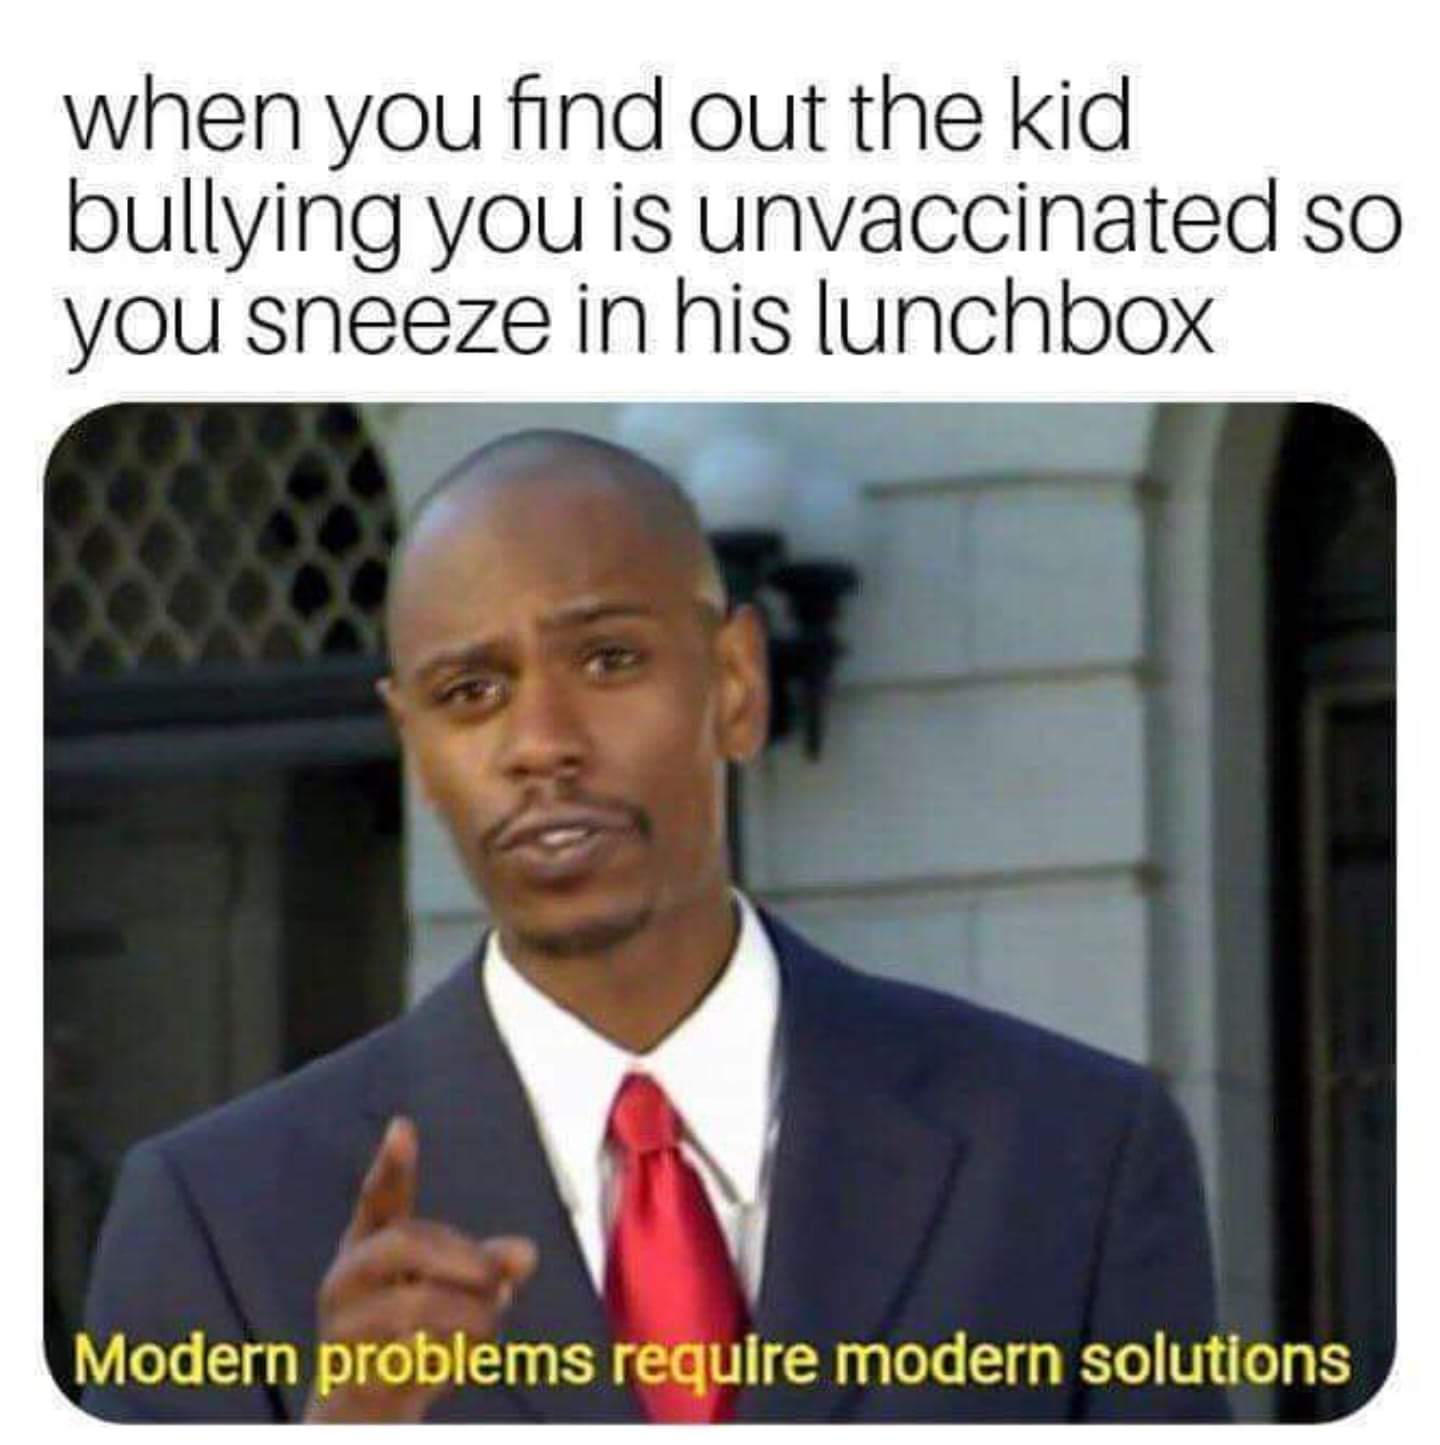 memes about the 13th amendment - when you find out the kid bullying you is unvaccinated so you sneeze in his lunchbox Modern problems require modern solutions